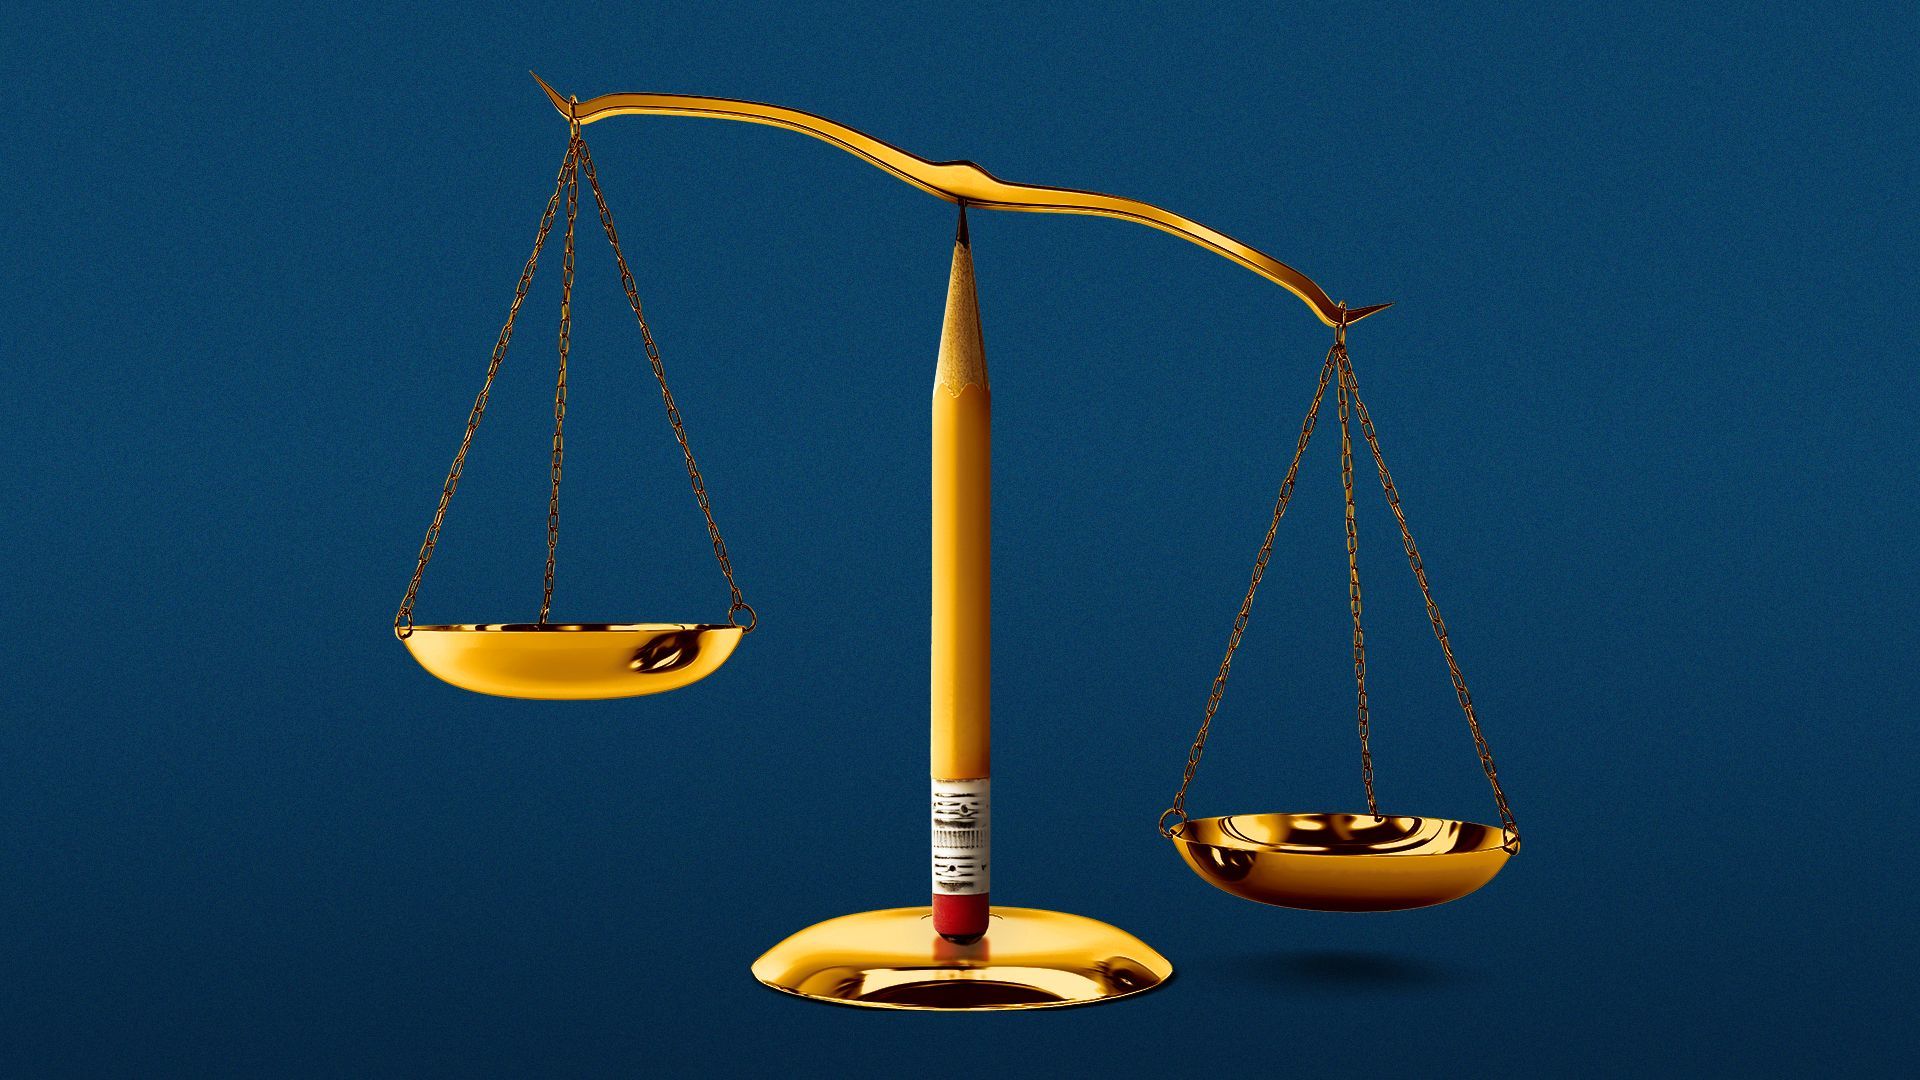 Illustration of an unbalanced scale balanced on top of a pencil.